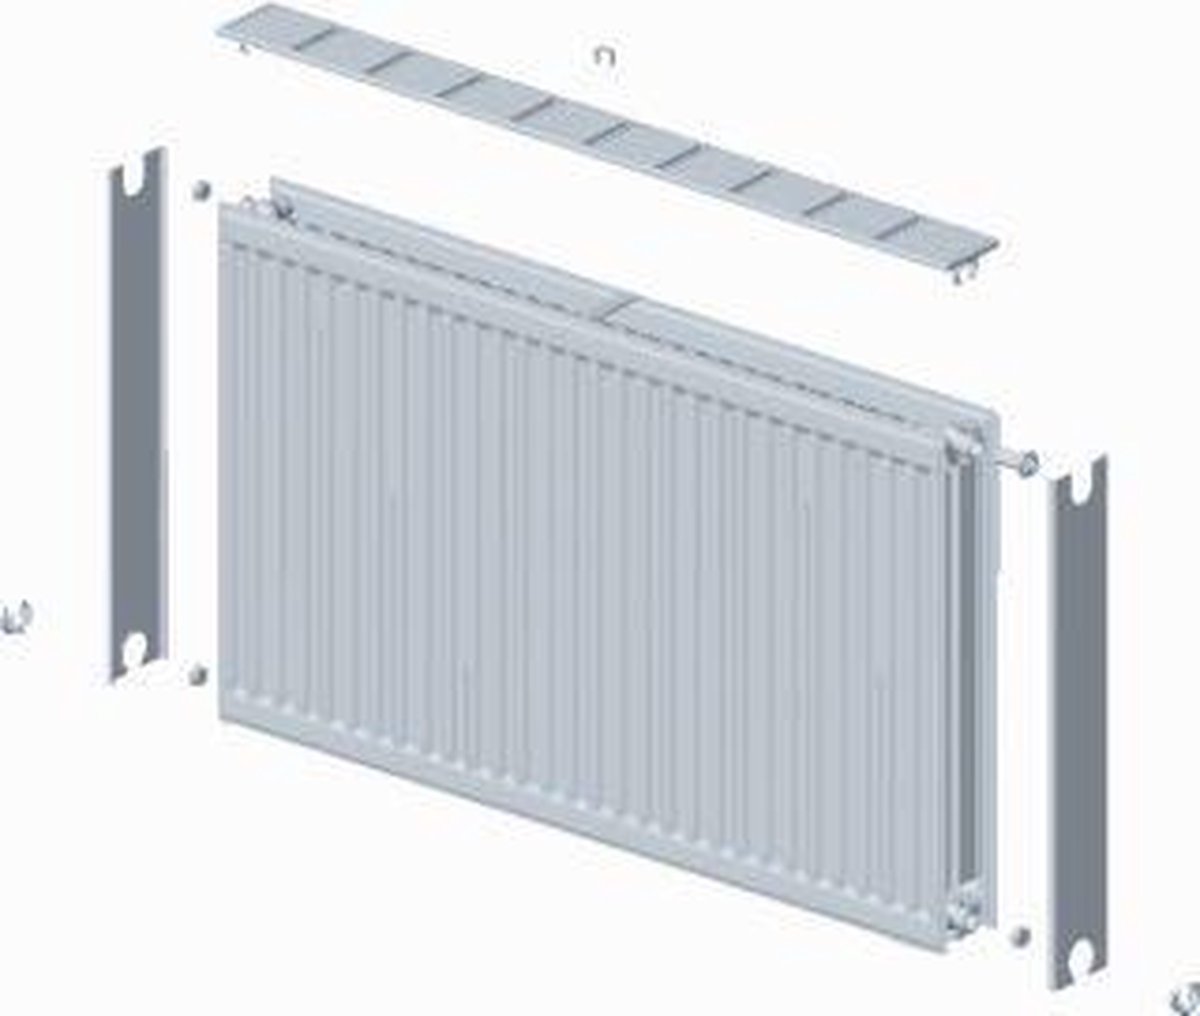 Stelrad paneelradiator Novello, staal, wit, (hxlxd) 900x900x100mm, 22